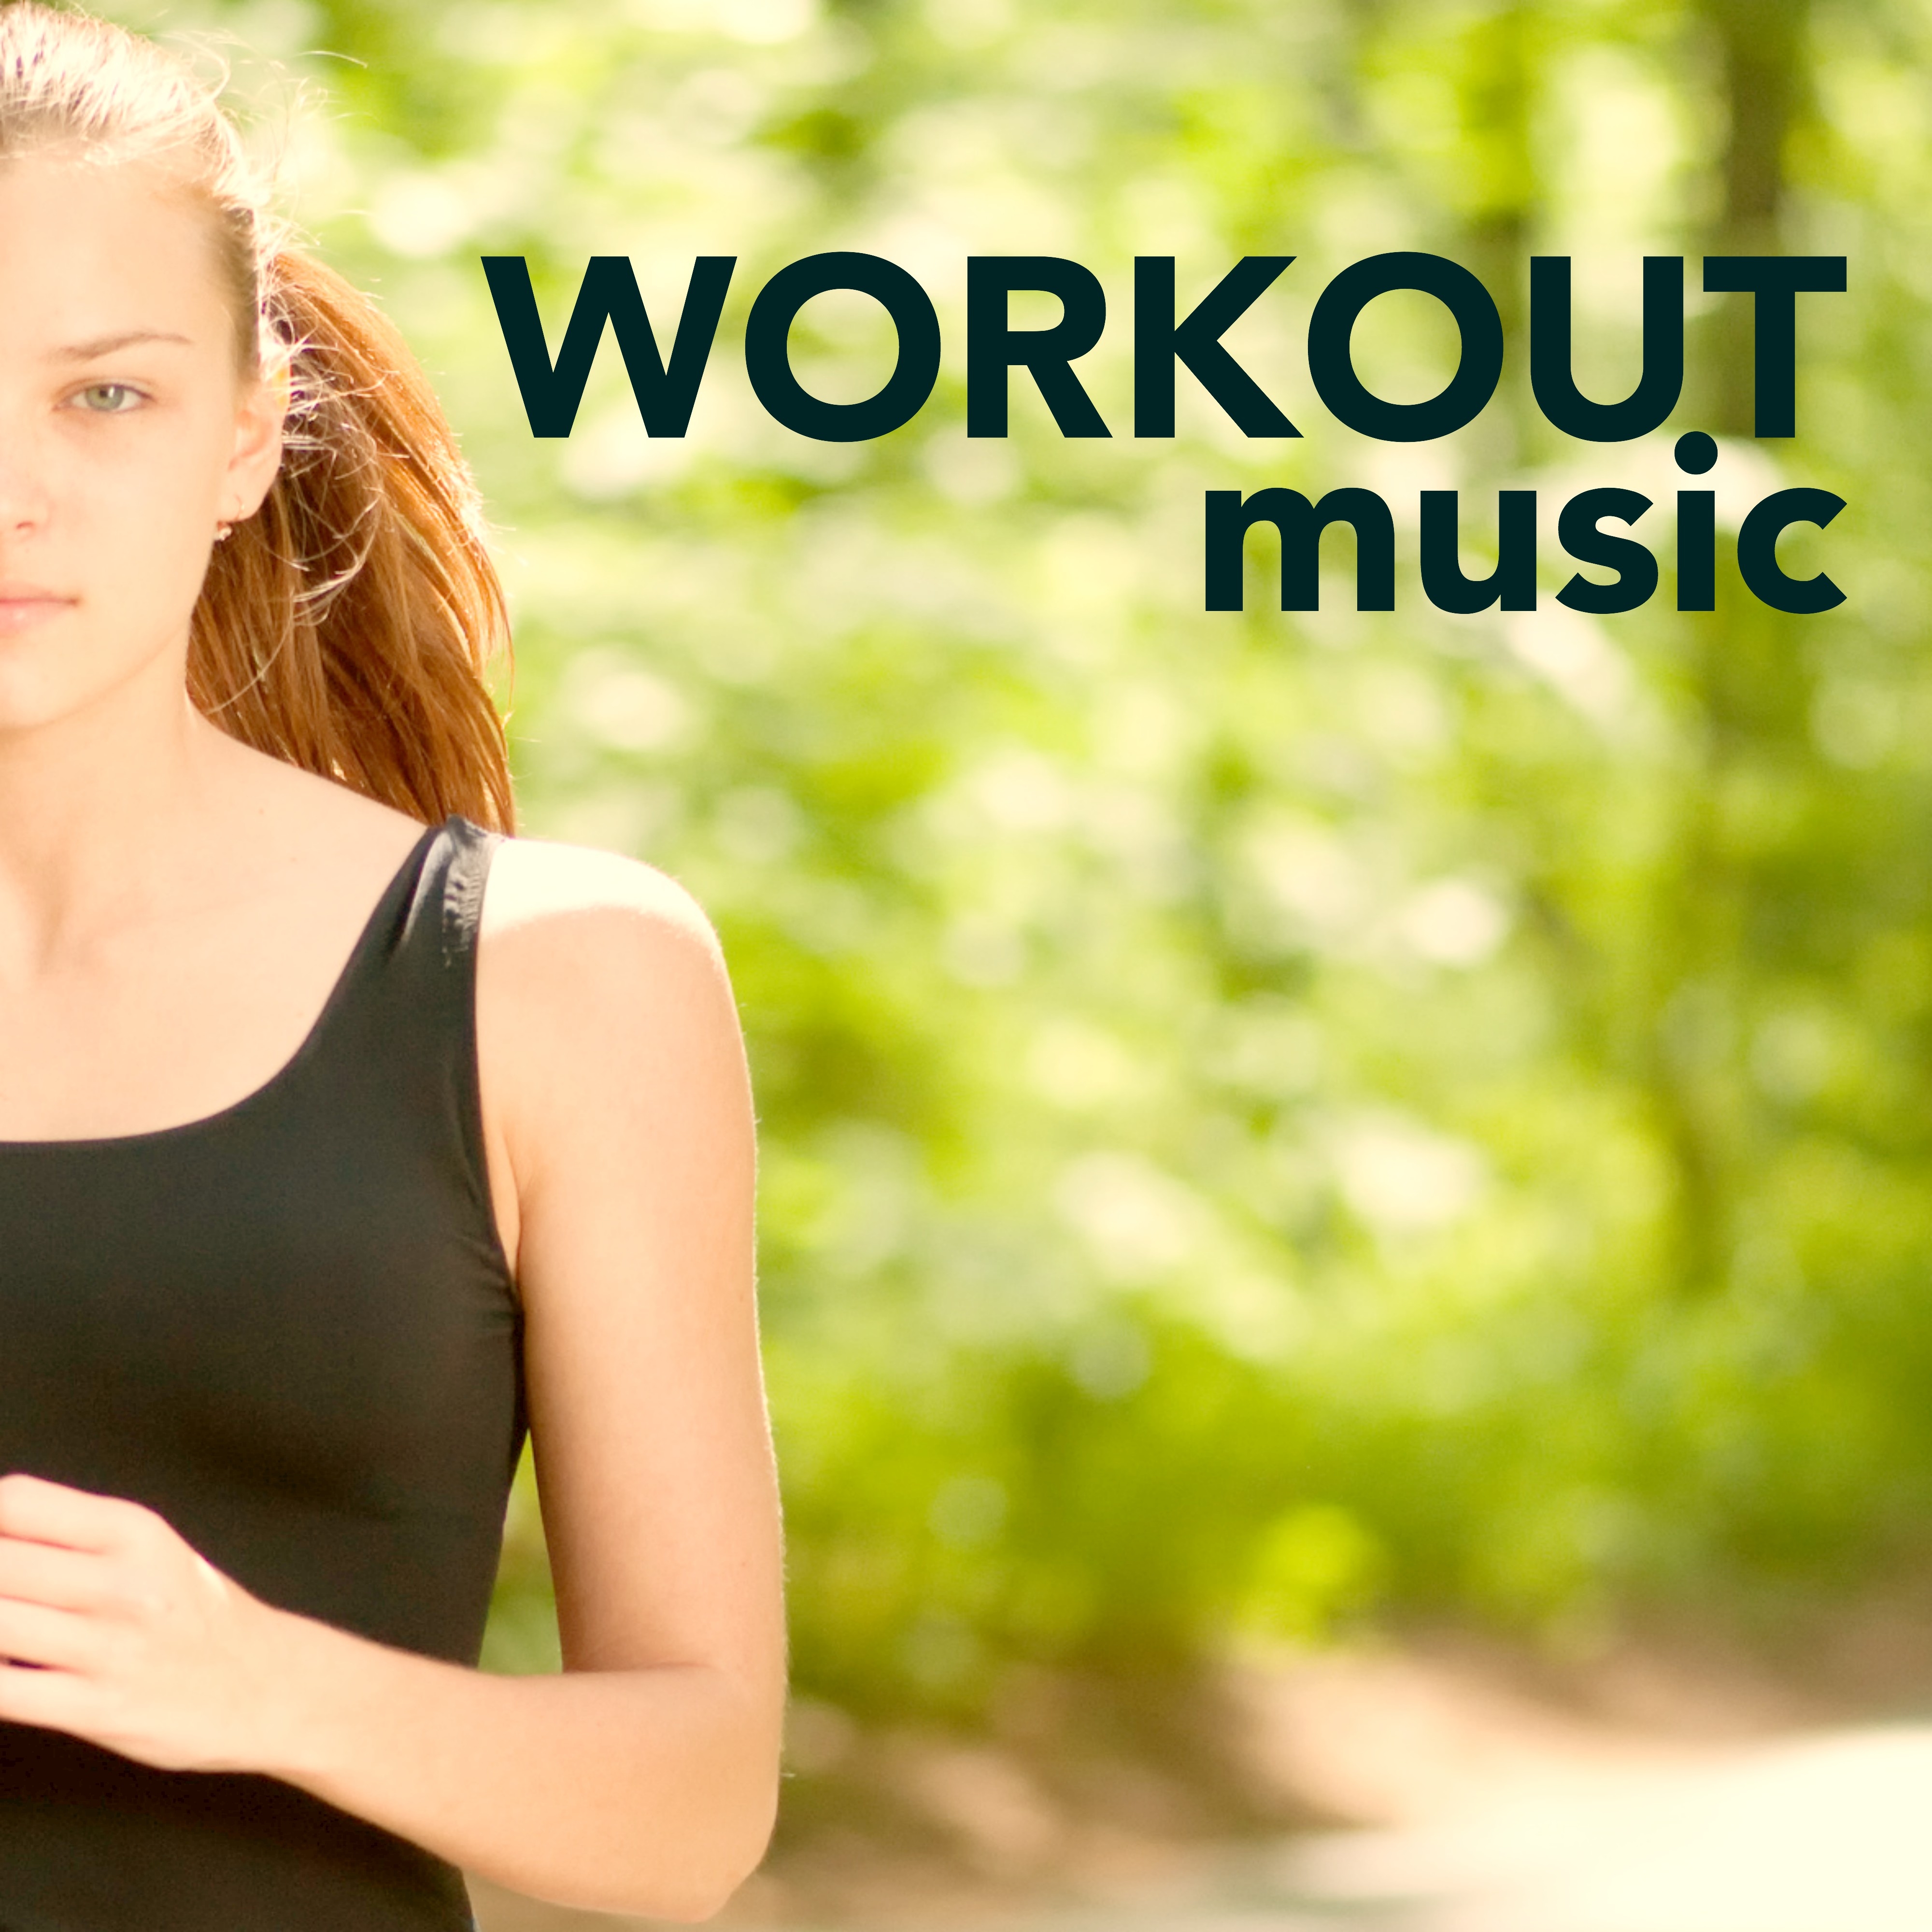 Workout Music - Fitness House & Electro Music for Fitness Session, Running & Cardio Training to Get Sexy Body